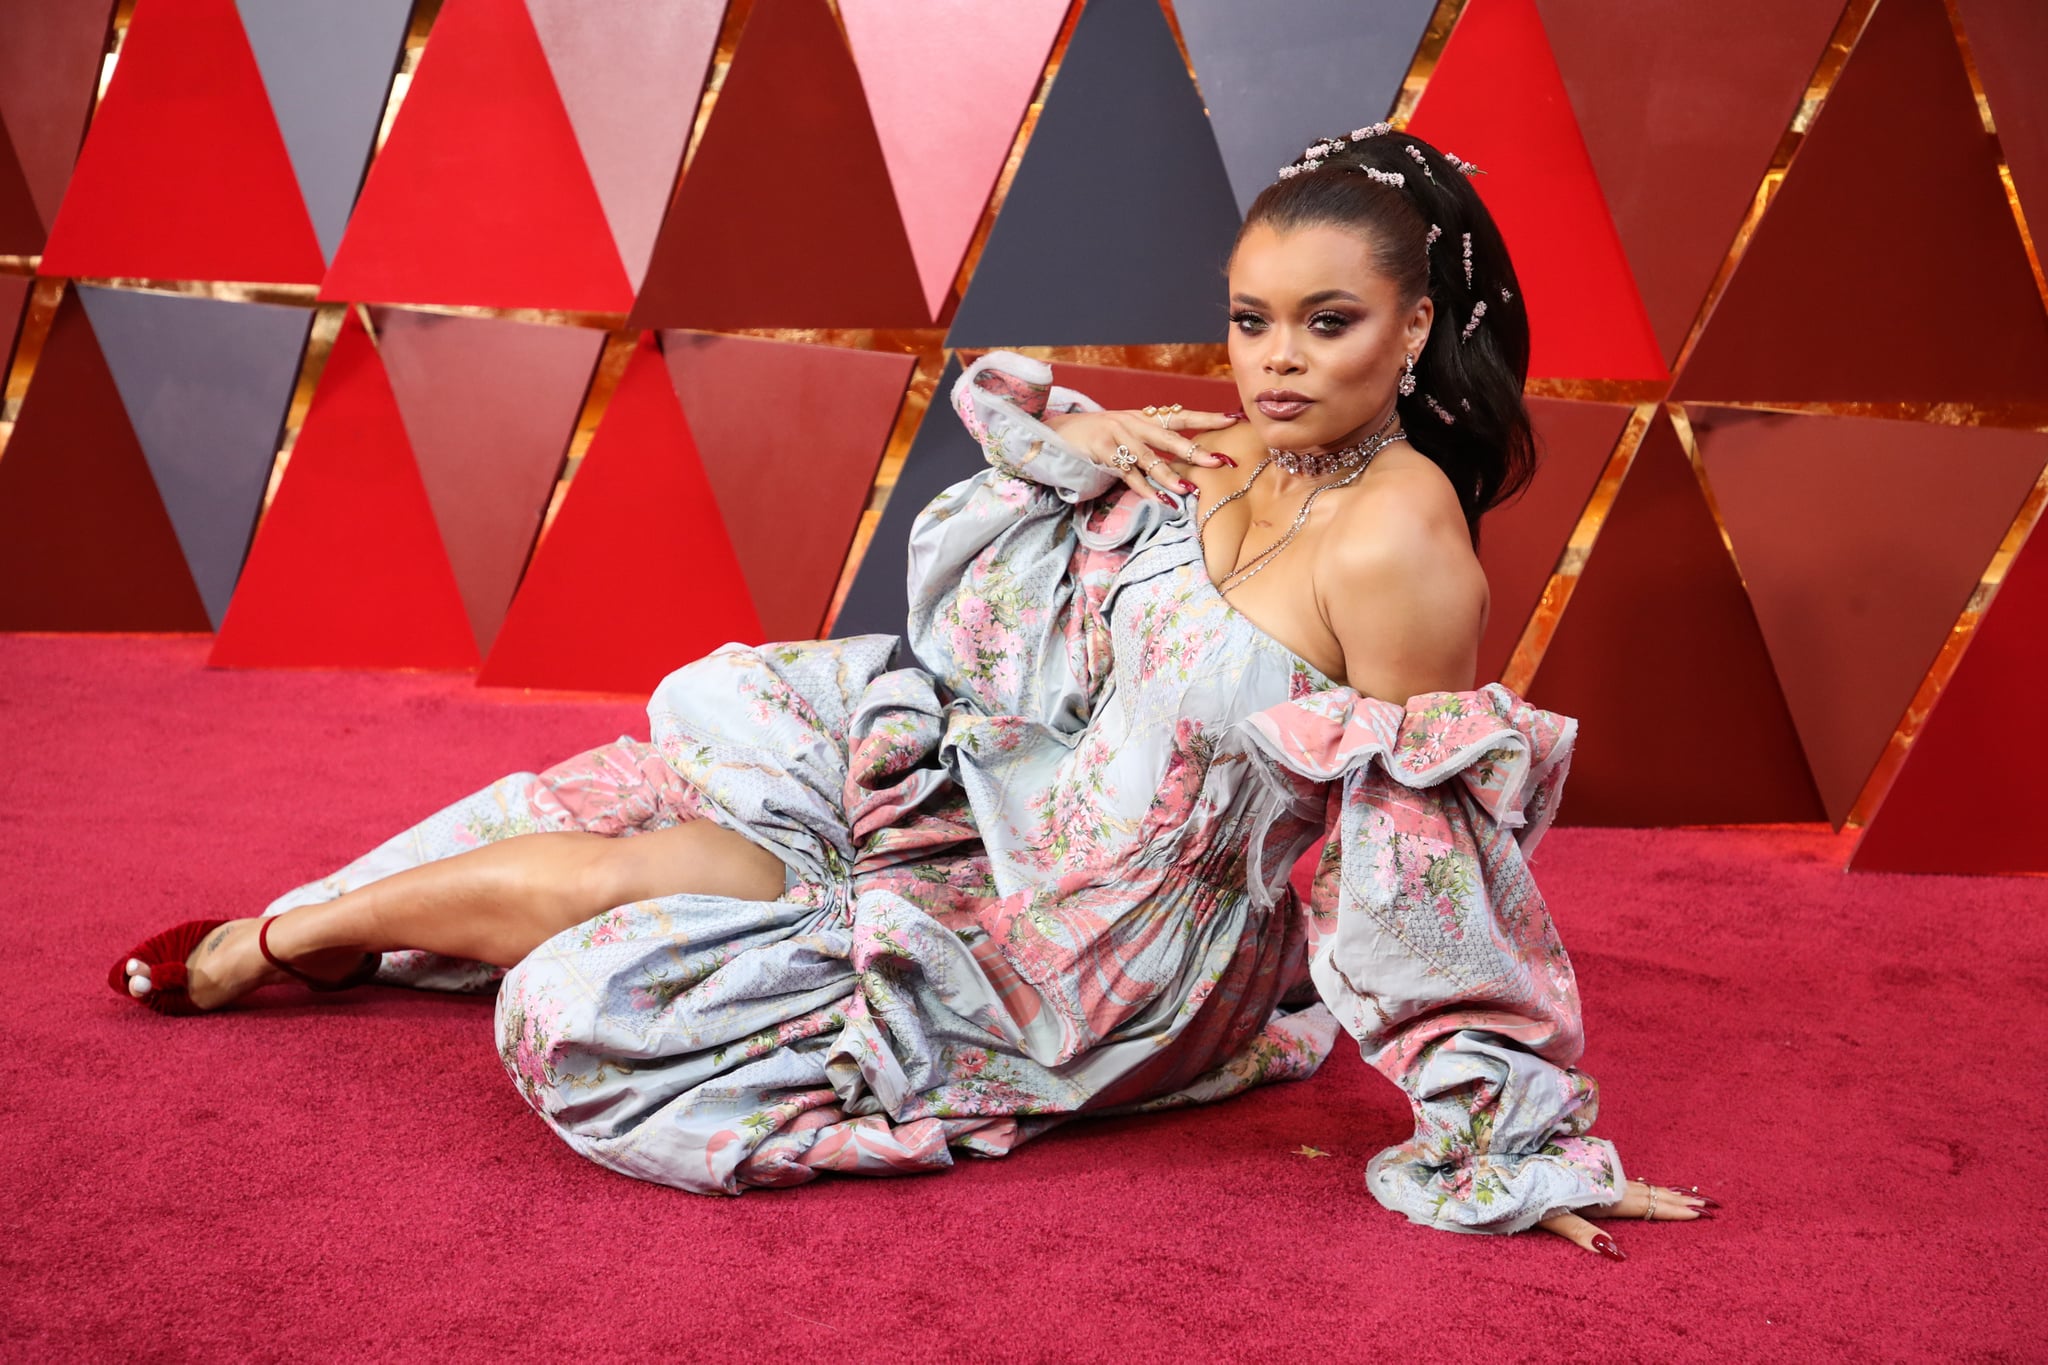 Mandatory Credit: Photo by Chelsea Lauren/REX/Shutterstock (9446174hz)Andra Day90th Annual Academy Awards, Arrivals, Los Angeles, USA - 04 Mar 2018